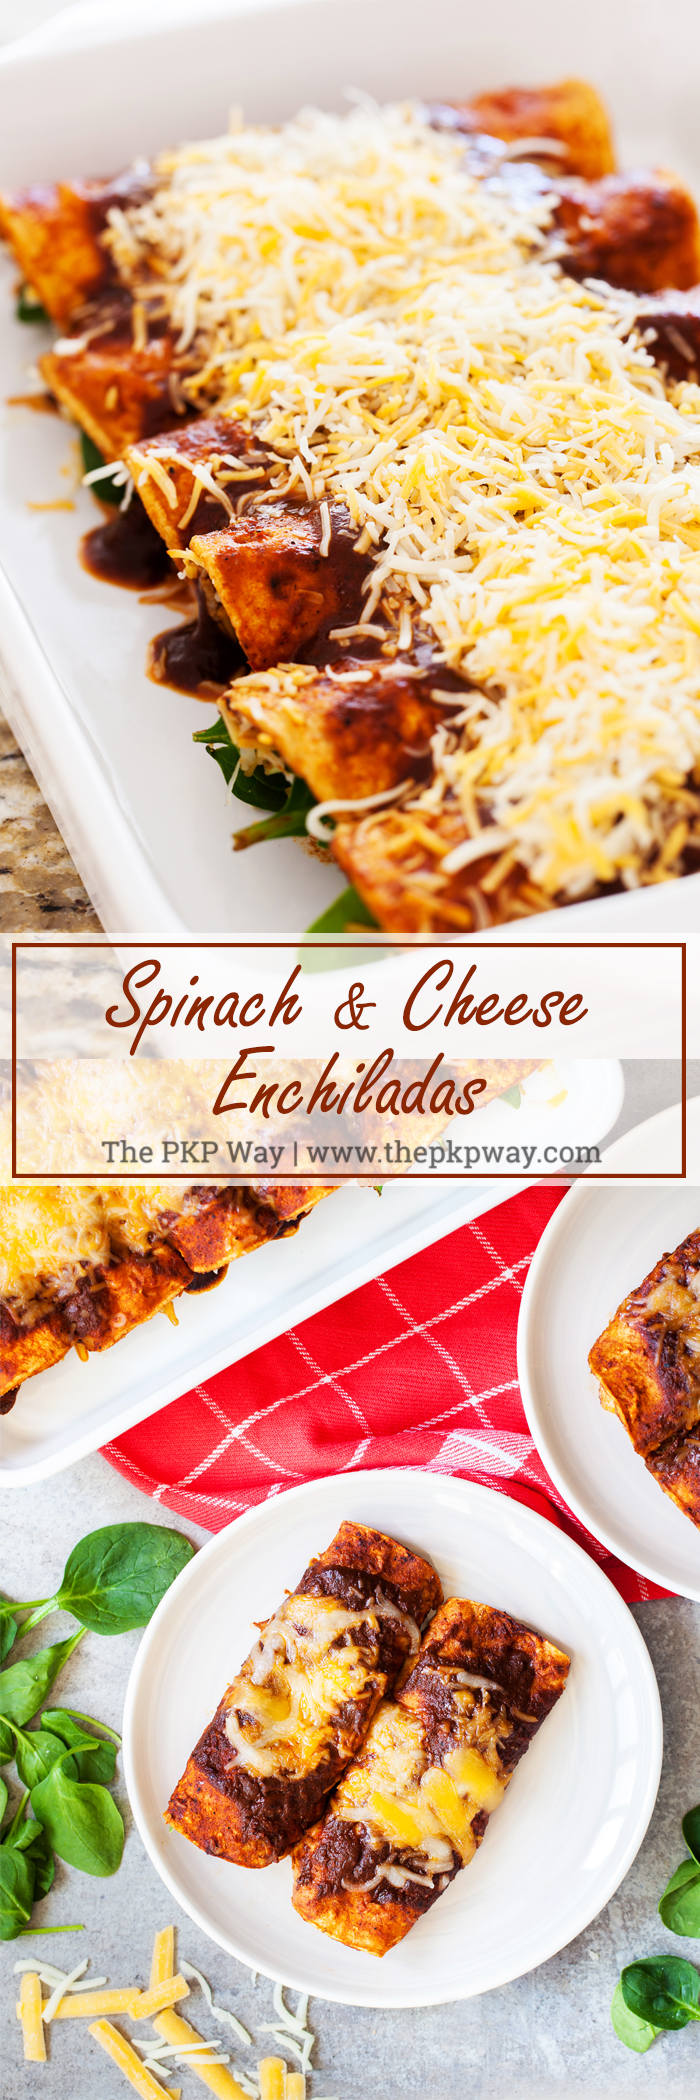 Spinach and cheese enchiladas are a healthier twist on a Mexican favorite. Spinach and cheese filling wrapped in a corn tortilla and doused with an authentic red enchilada sauce.